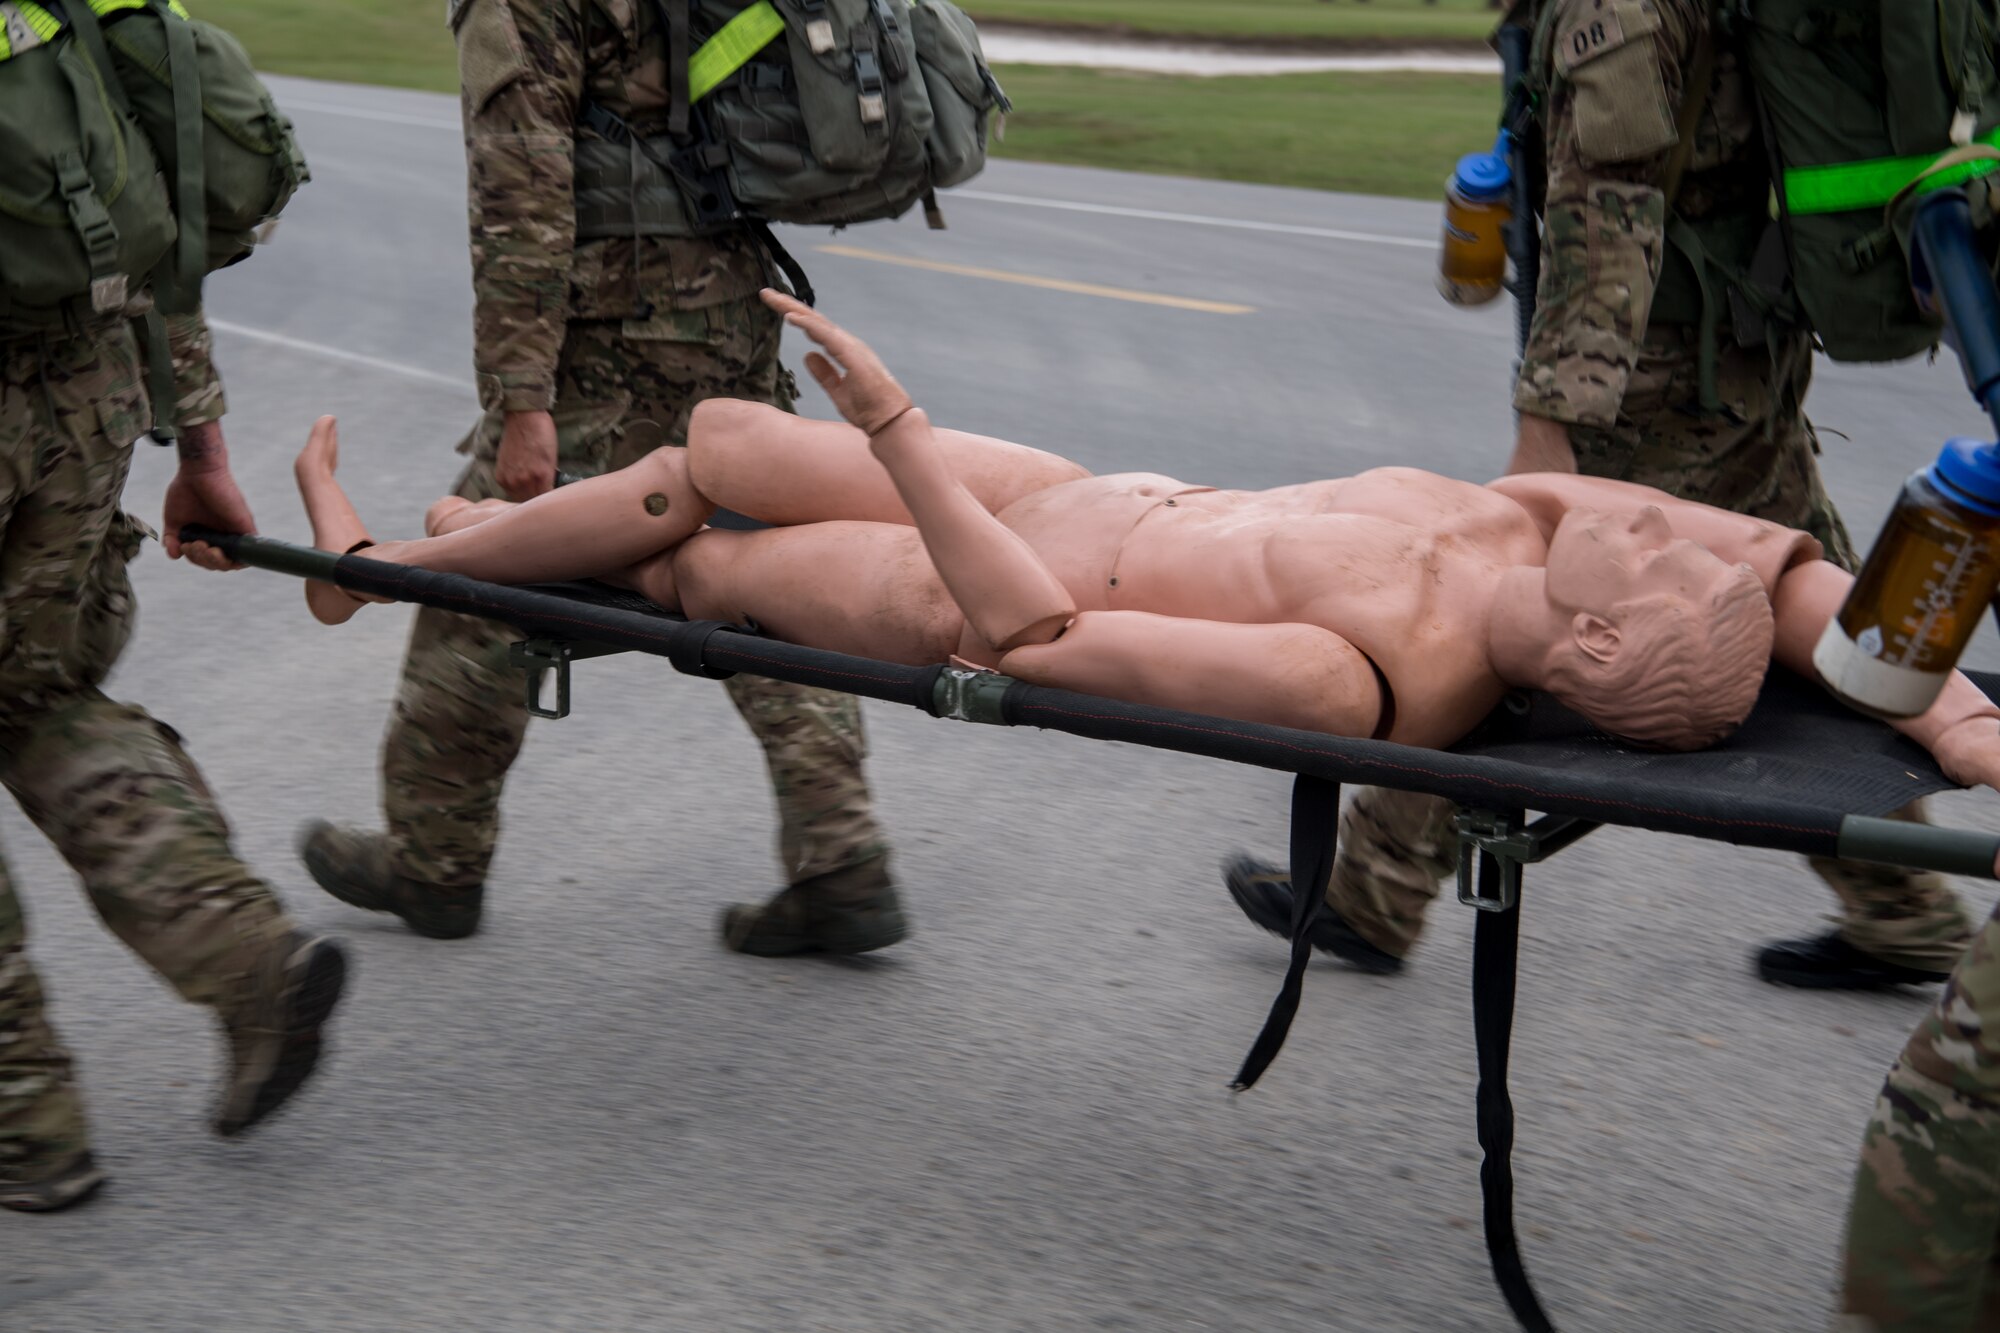 Four Special Tactics tactical air control party candidates carry a mannequin patient on a litter down a road as part of scenario during assessment